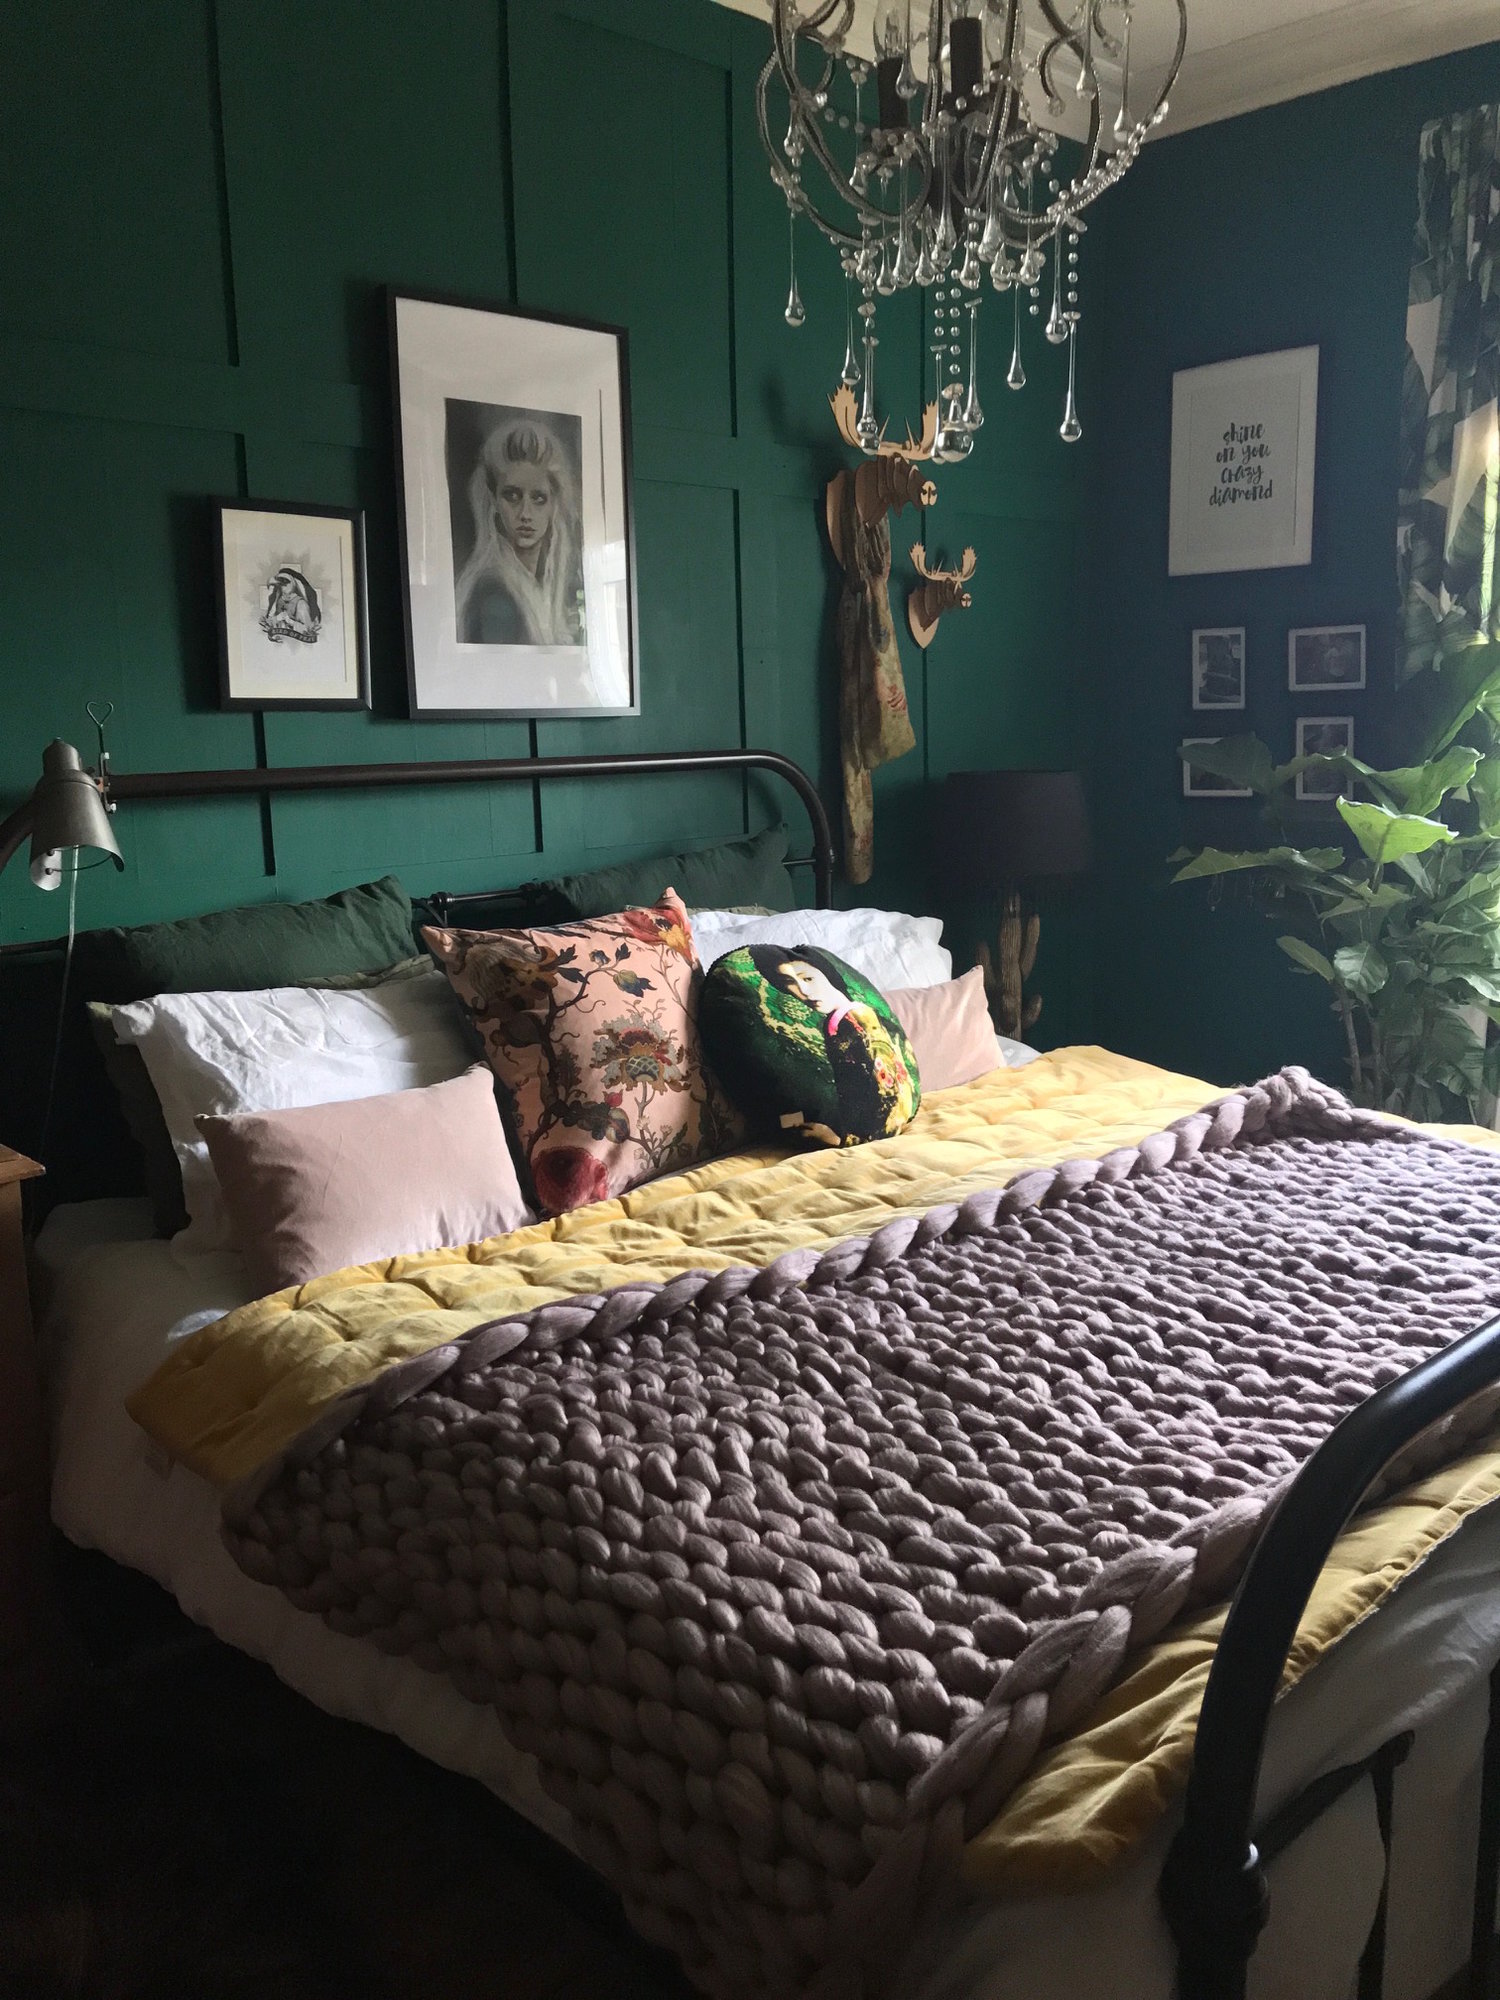 My Bedroom Renovation | The Girl With The Green Sofa